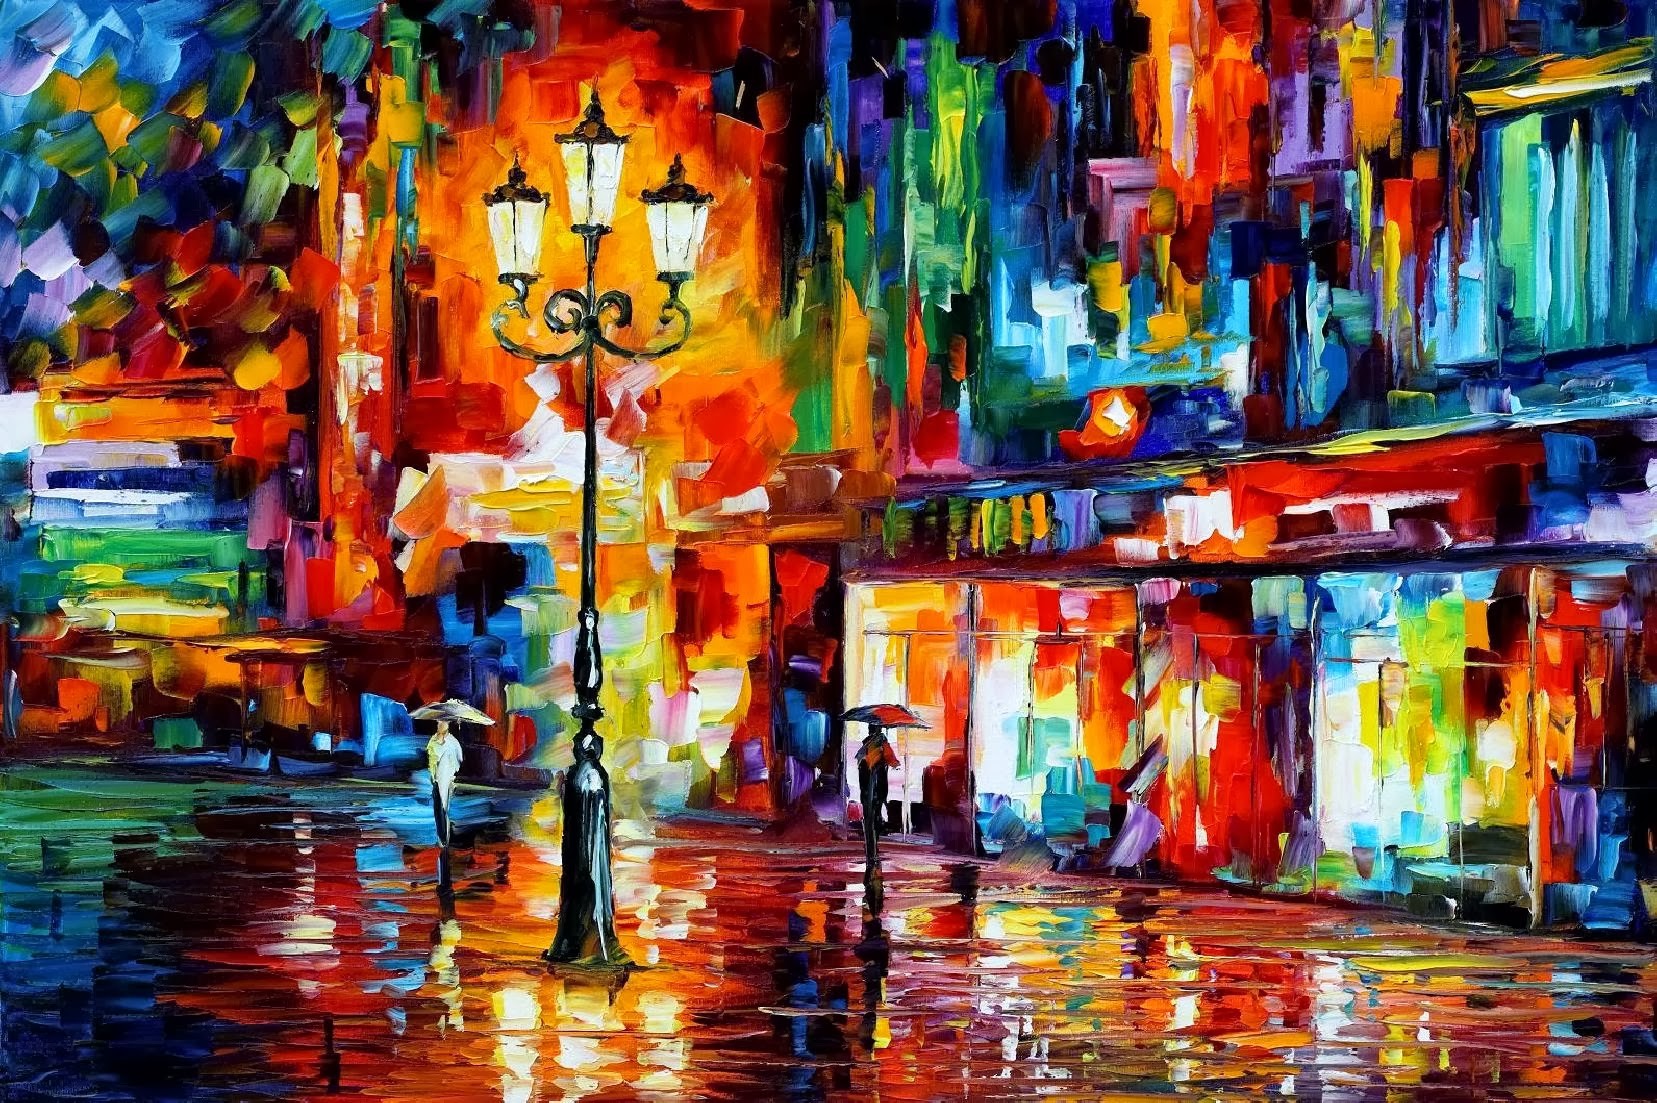 Painting Painting Colorful Street Light Leonid Afremov Colorful Street Light Artwork Umbrella Leonid 1657x1103